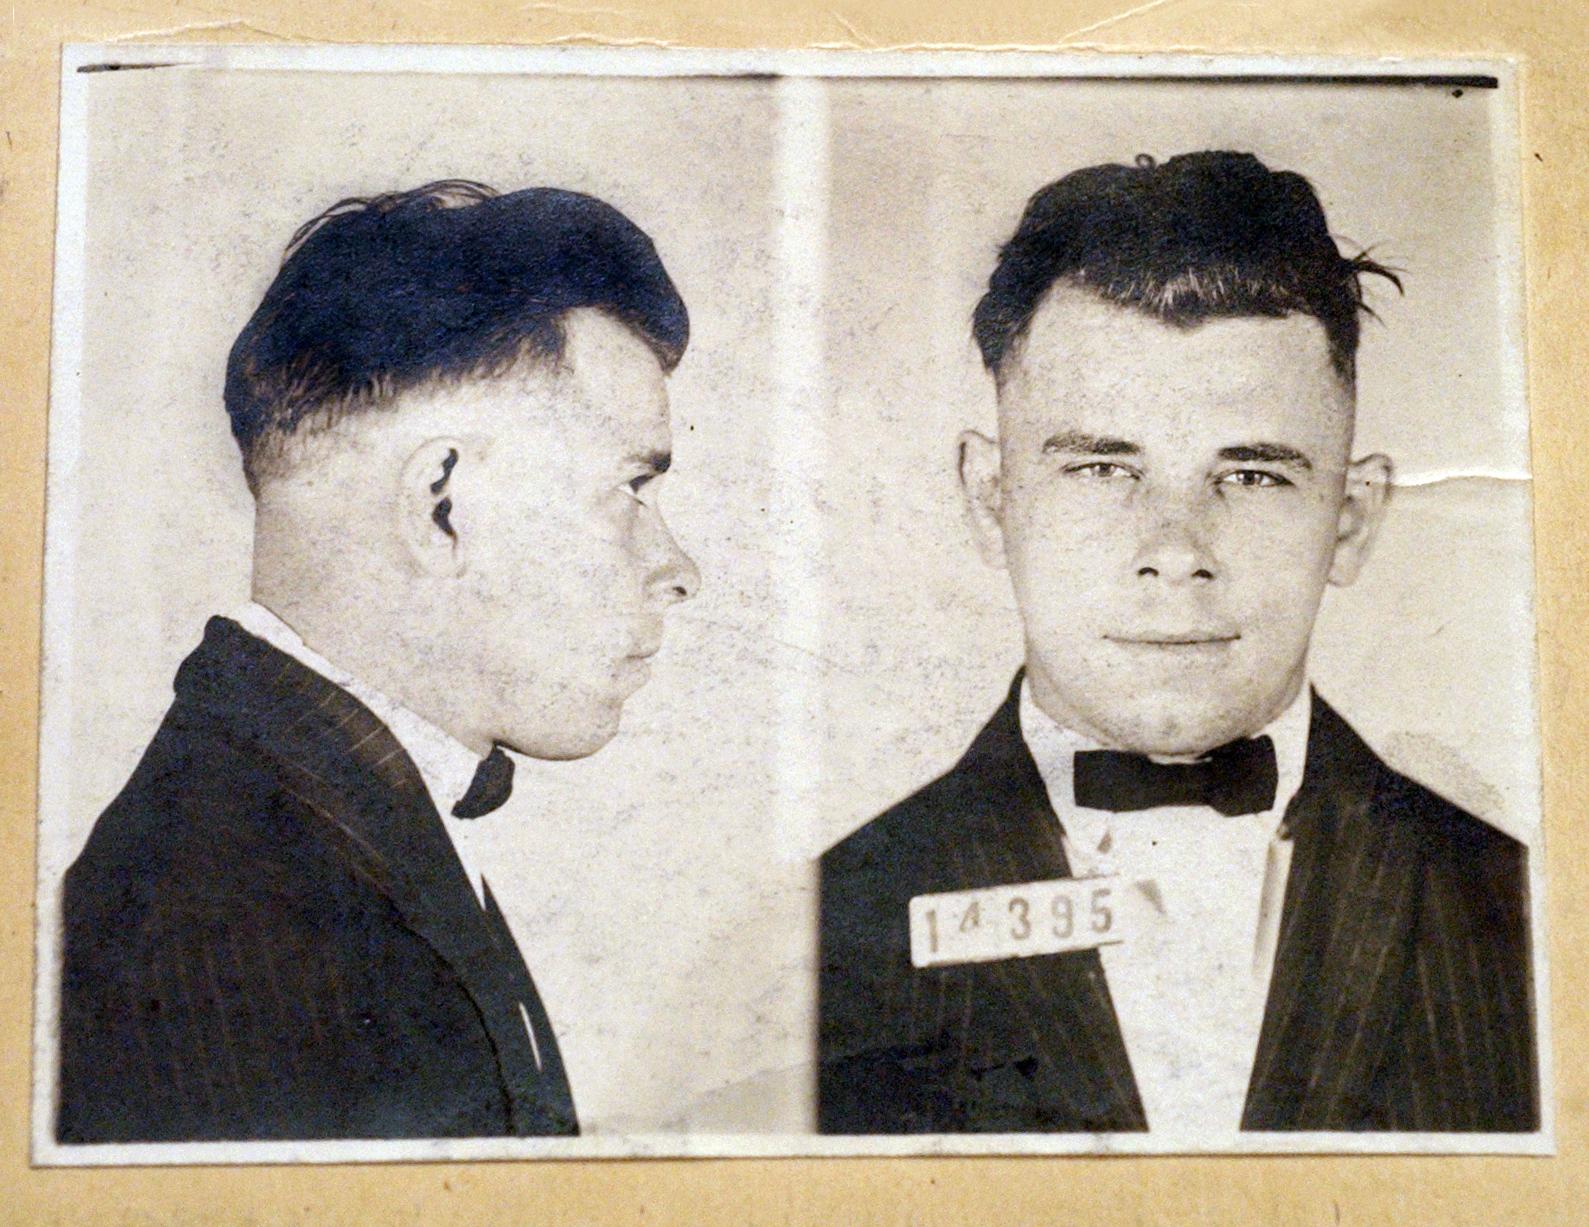 This file photo shows Indiana Reformatory booking shots of John Dillinger, stored in the state archives, and shows the notorious gangster as a 21-year-old. (AP Photo / The Indianapolis Star, Charlie Nye, File)